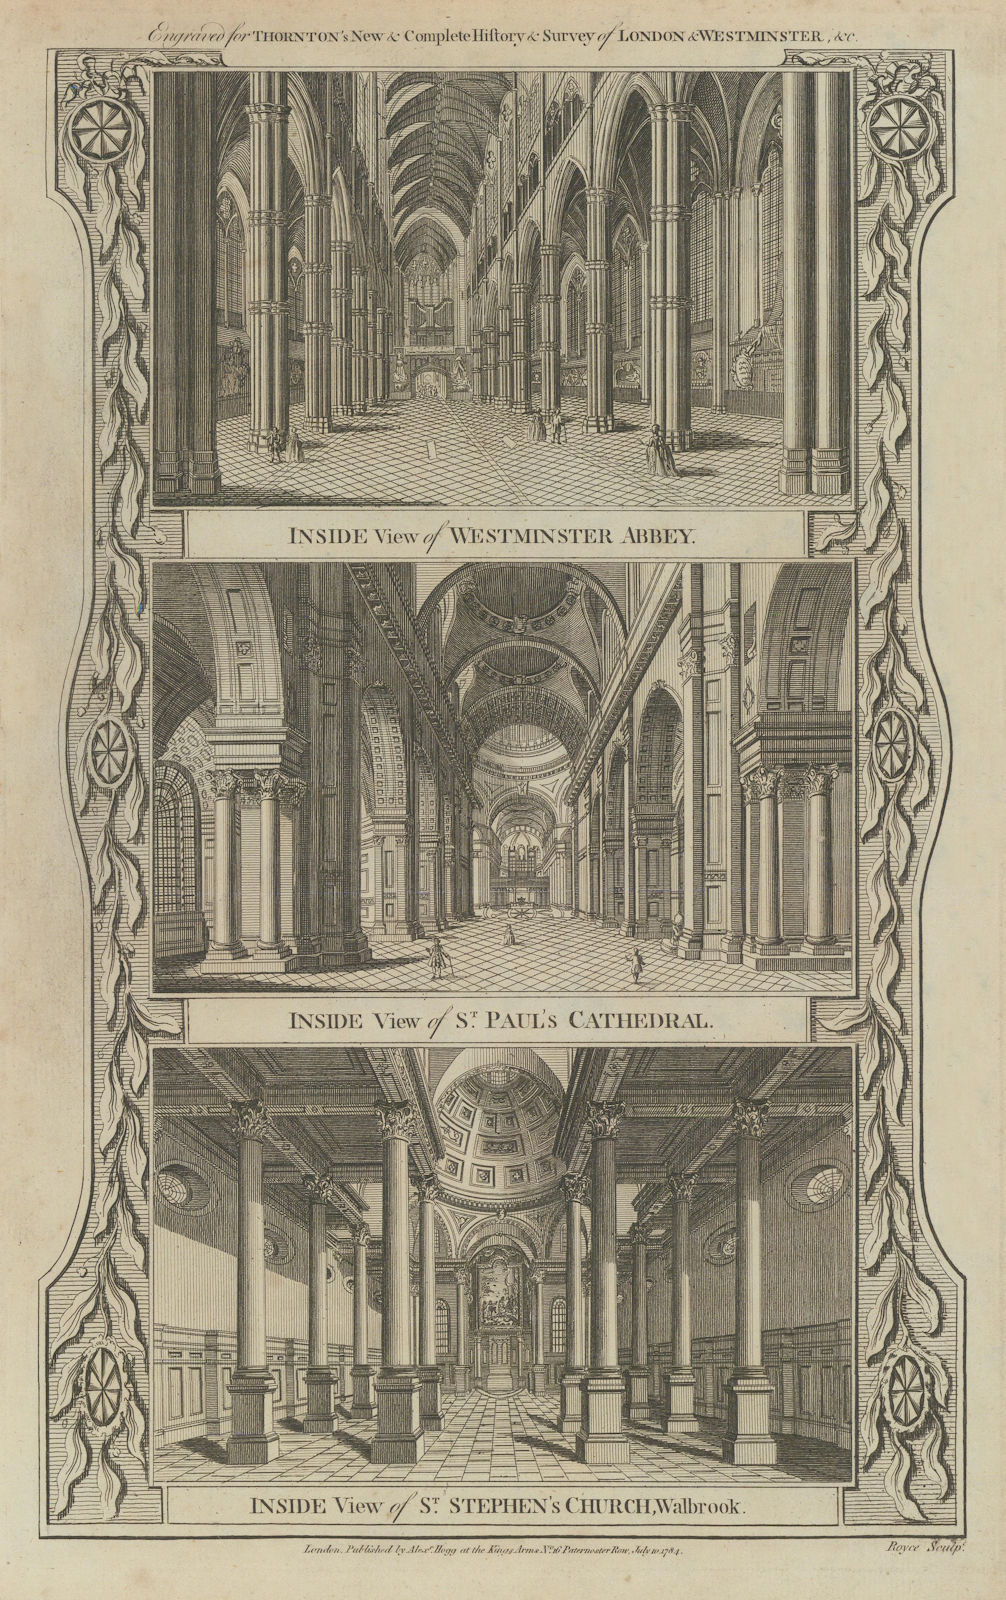 Interiors of Westminster Abbey, St. Paul's Cathedral, St. Stephen Walbrook 1784